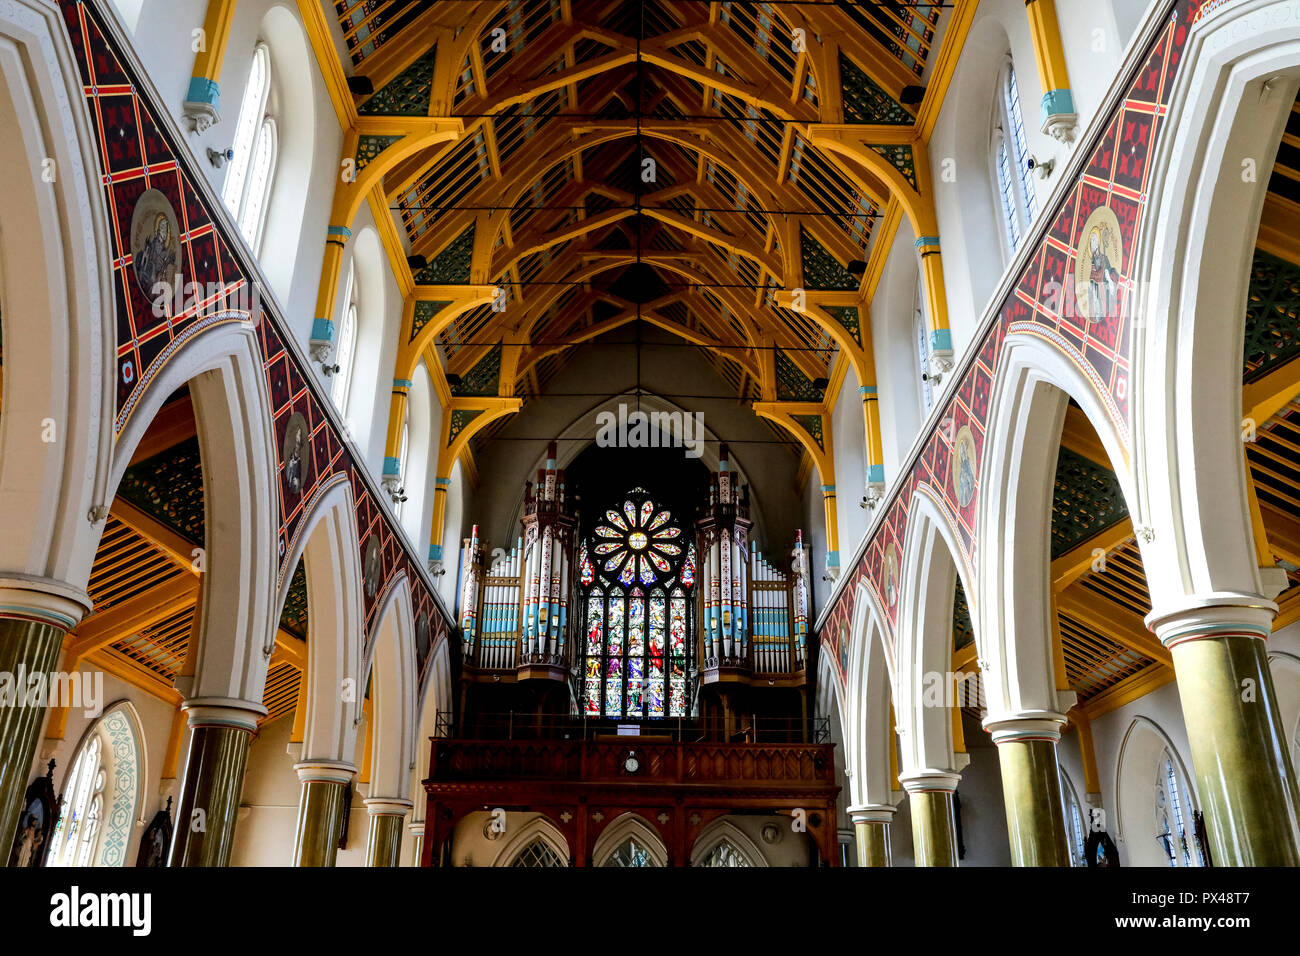 St Peter's catholic cathedral, Belfast, Northern Ireland. Nave. Ulster, U.K. Stock Photo